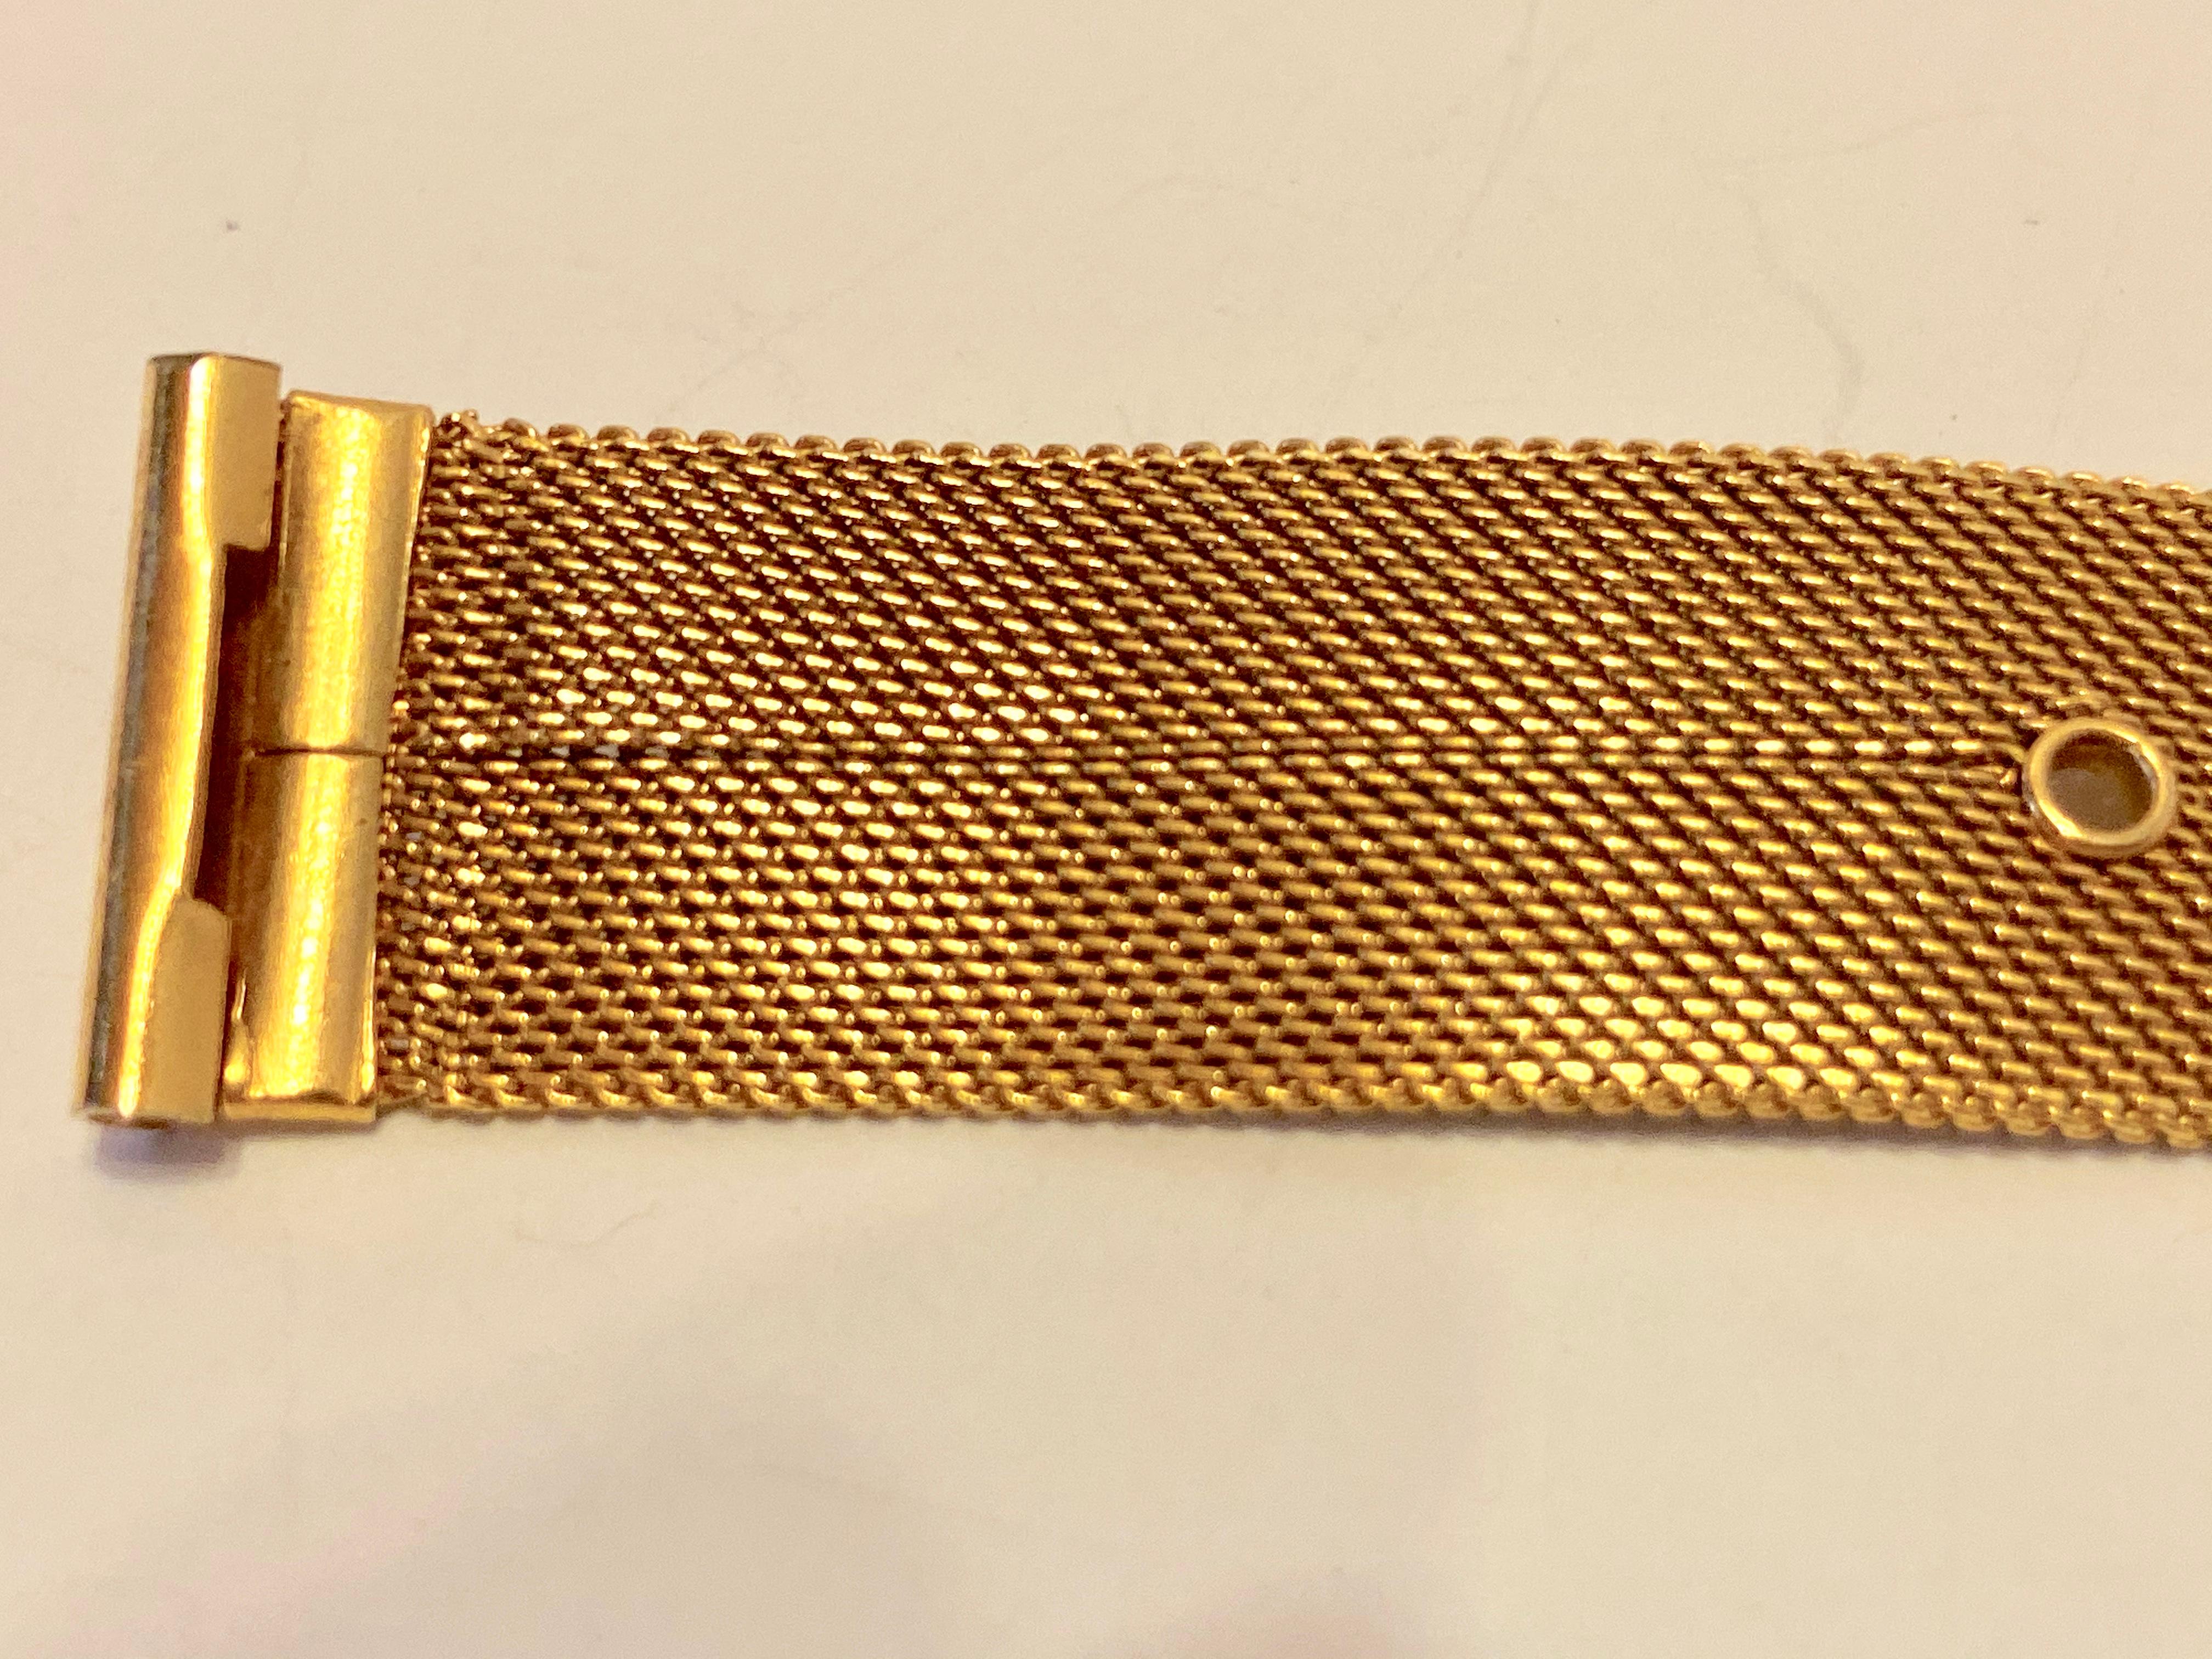 Micro Gold Hardware Mesh 'Buckle' Style Adjustable Watch Strap For Sale 1